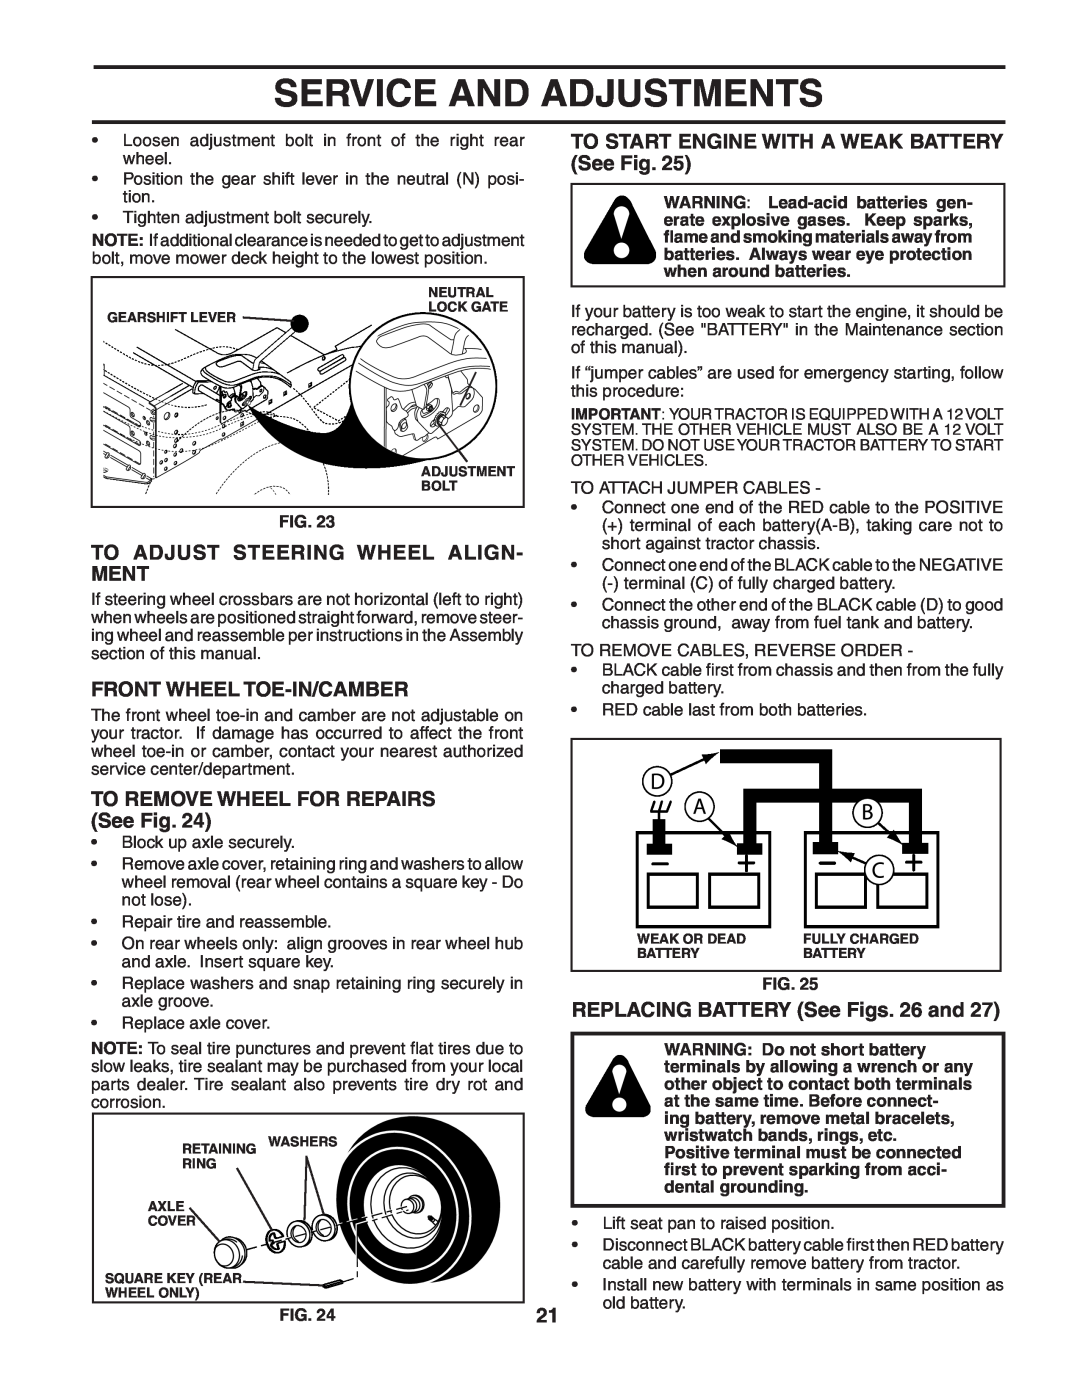 Poulan 188870 manual To Adjust Steering Wheel Align- Ment, Front Wheel Toe-In/Camber, TO REMOVE WHEEL FOR REPAIRS See Fig 